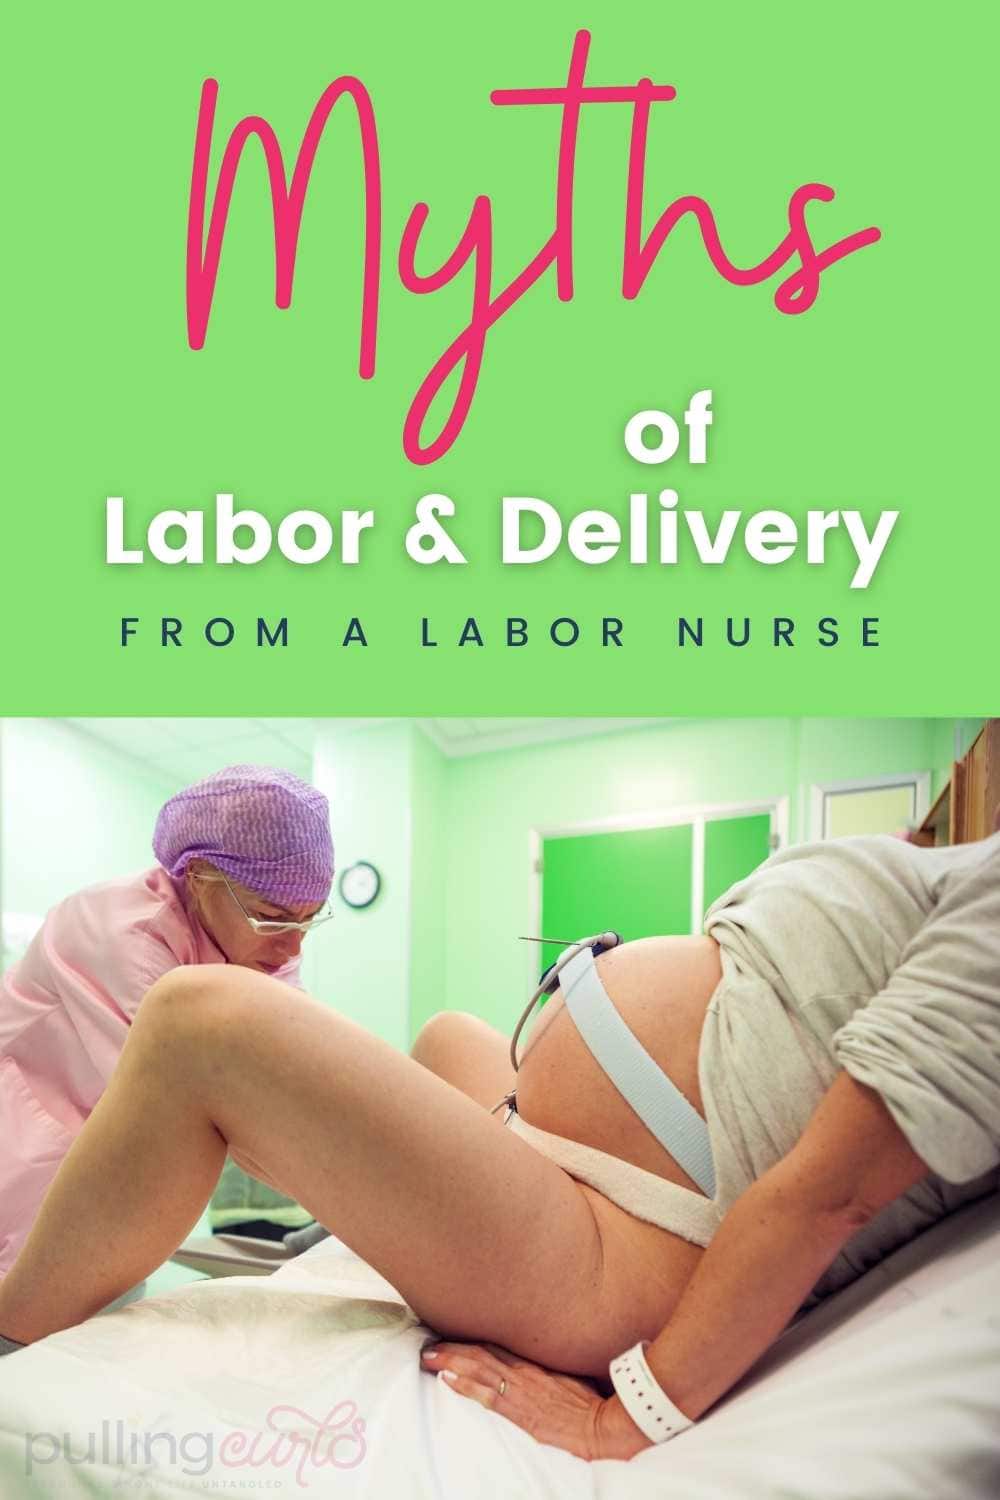 While Nurses are some of the most superstitious people you will ever meet, it's the patients I want to talk to today. Here are three myths almost everyone believes in labor and delivery that just aren't true? via @pullingcurls